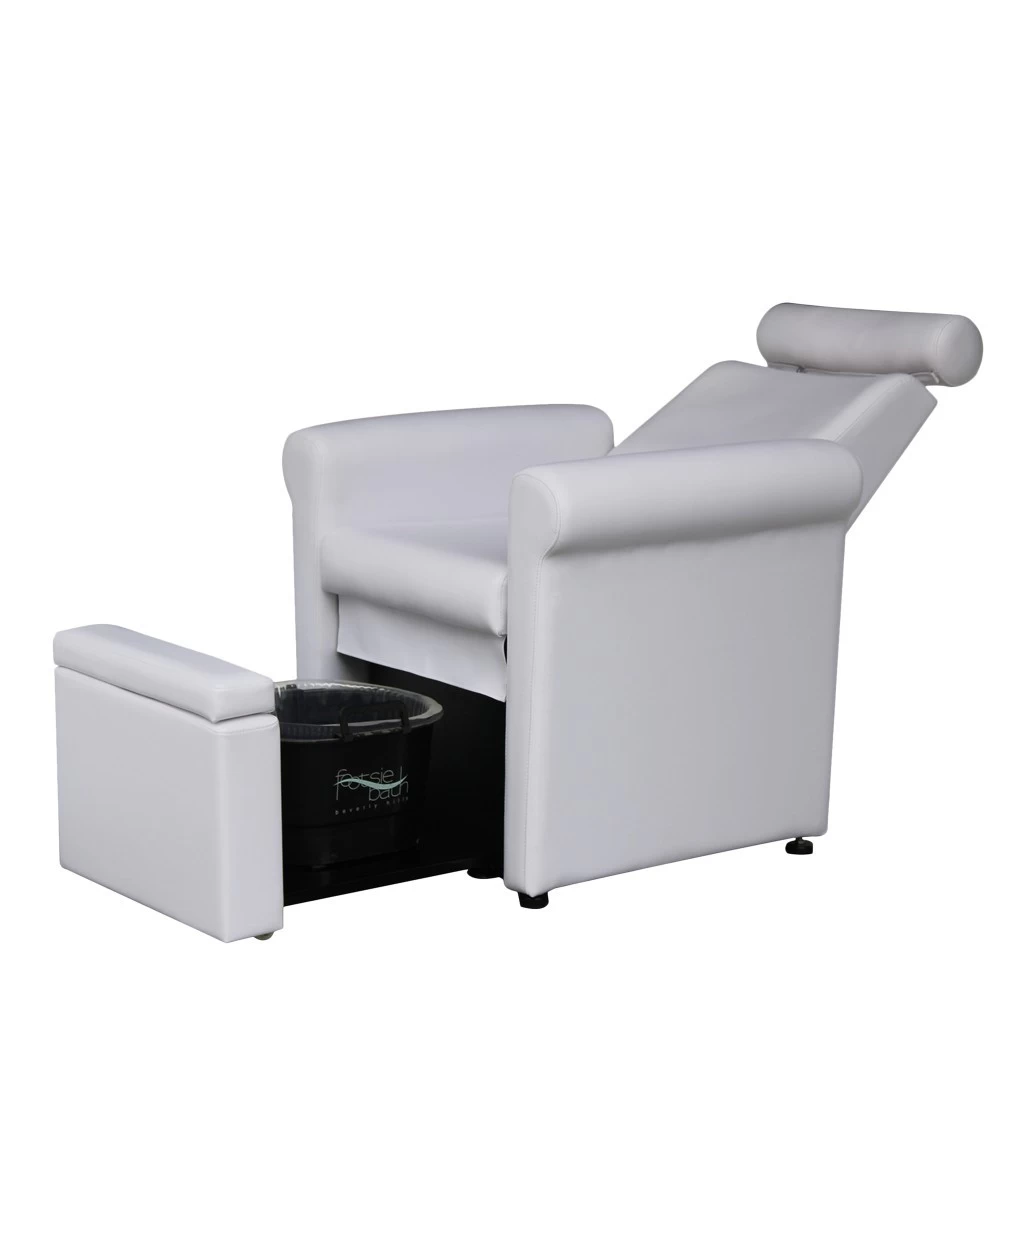 Pedicure chair wholesale with ceragem v3 price supplier for pedicure foot massage chair factory